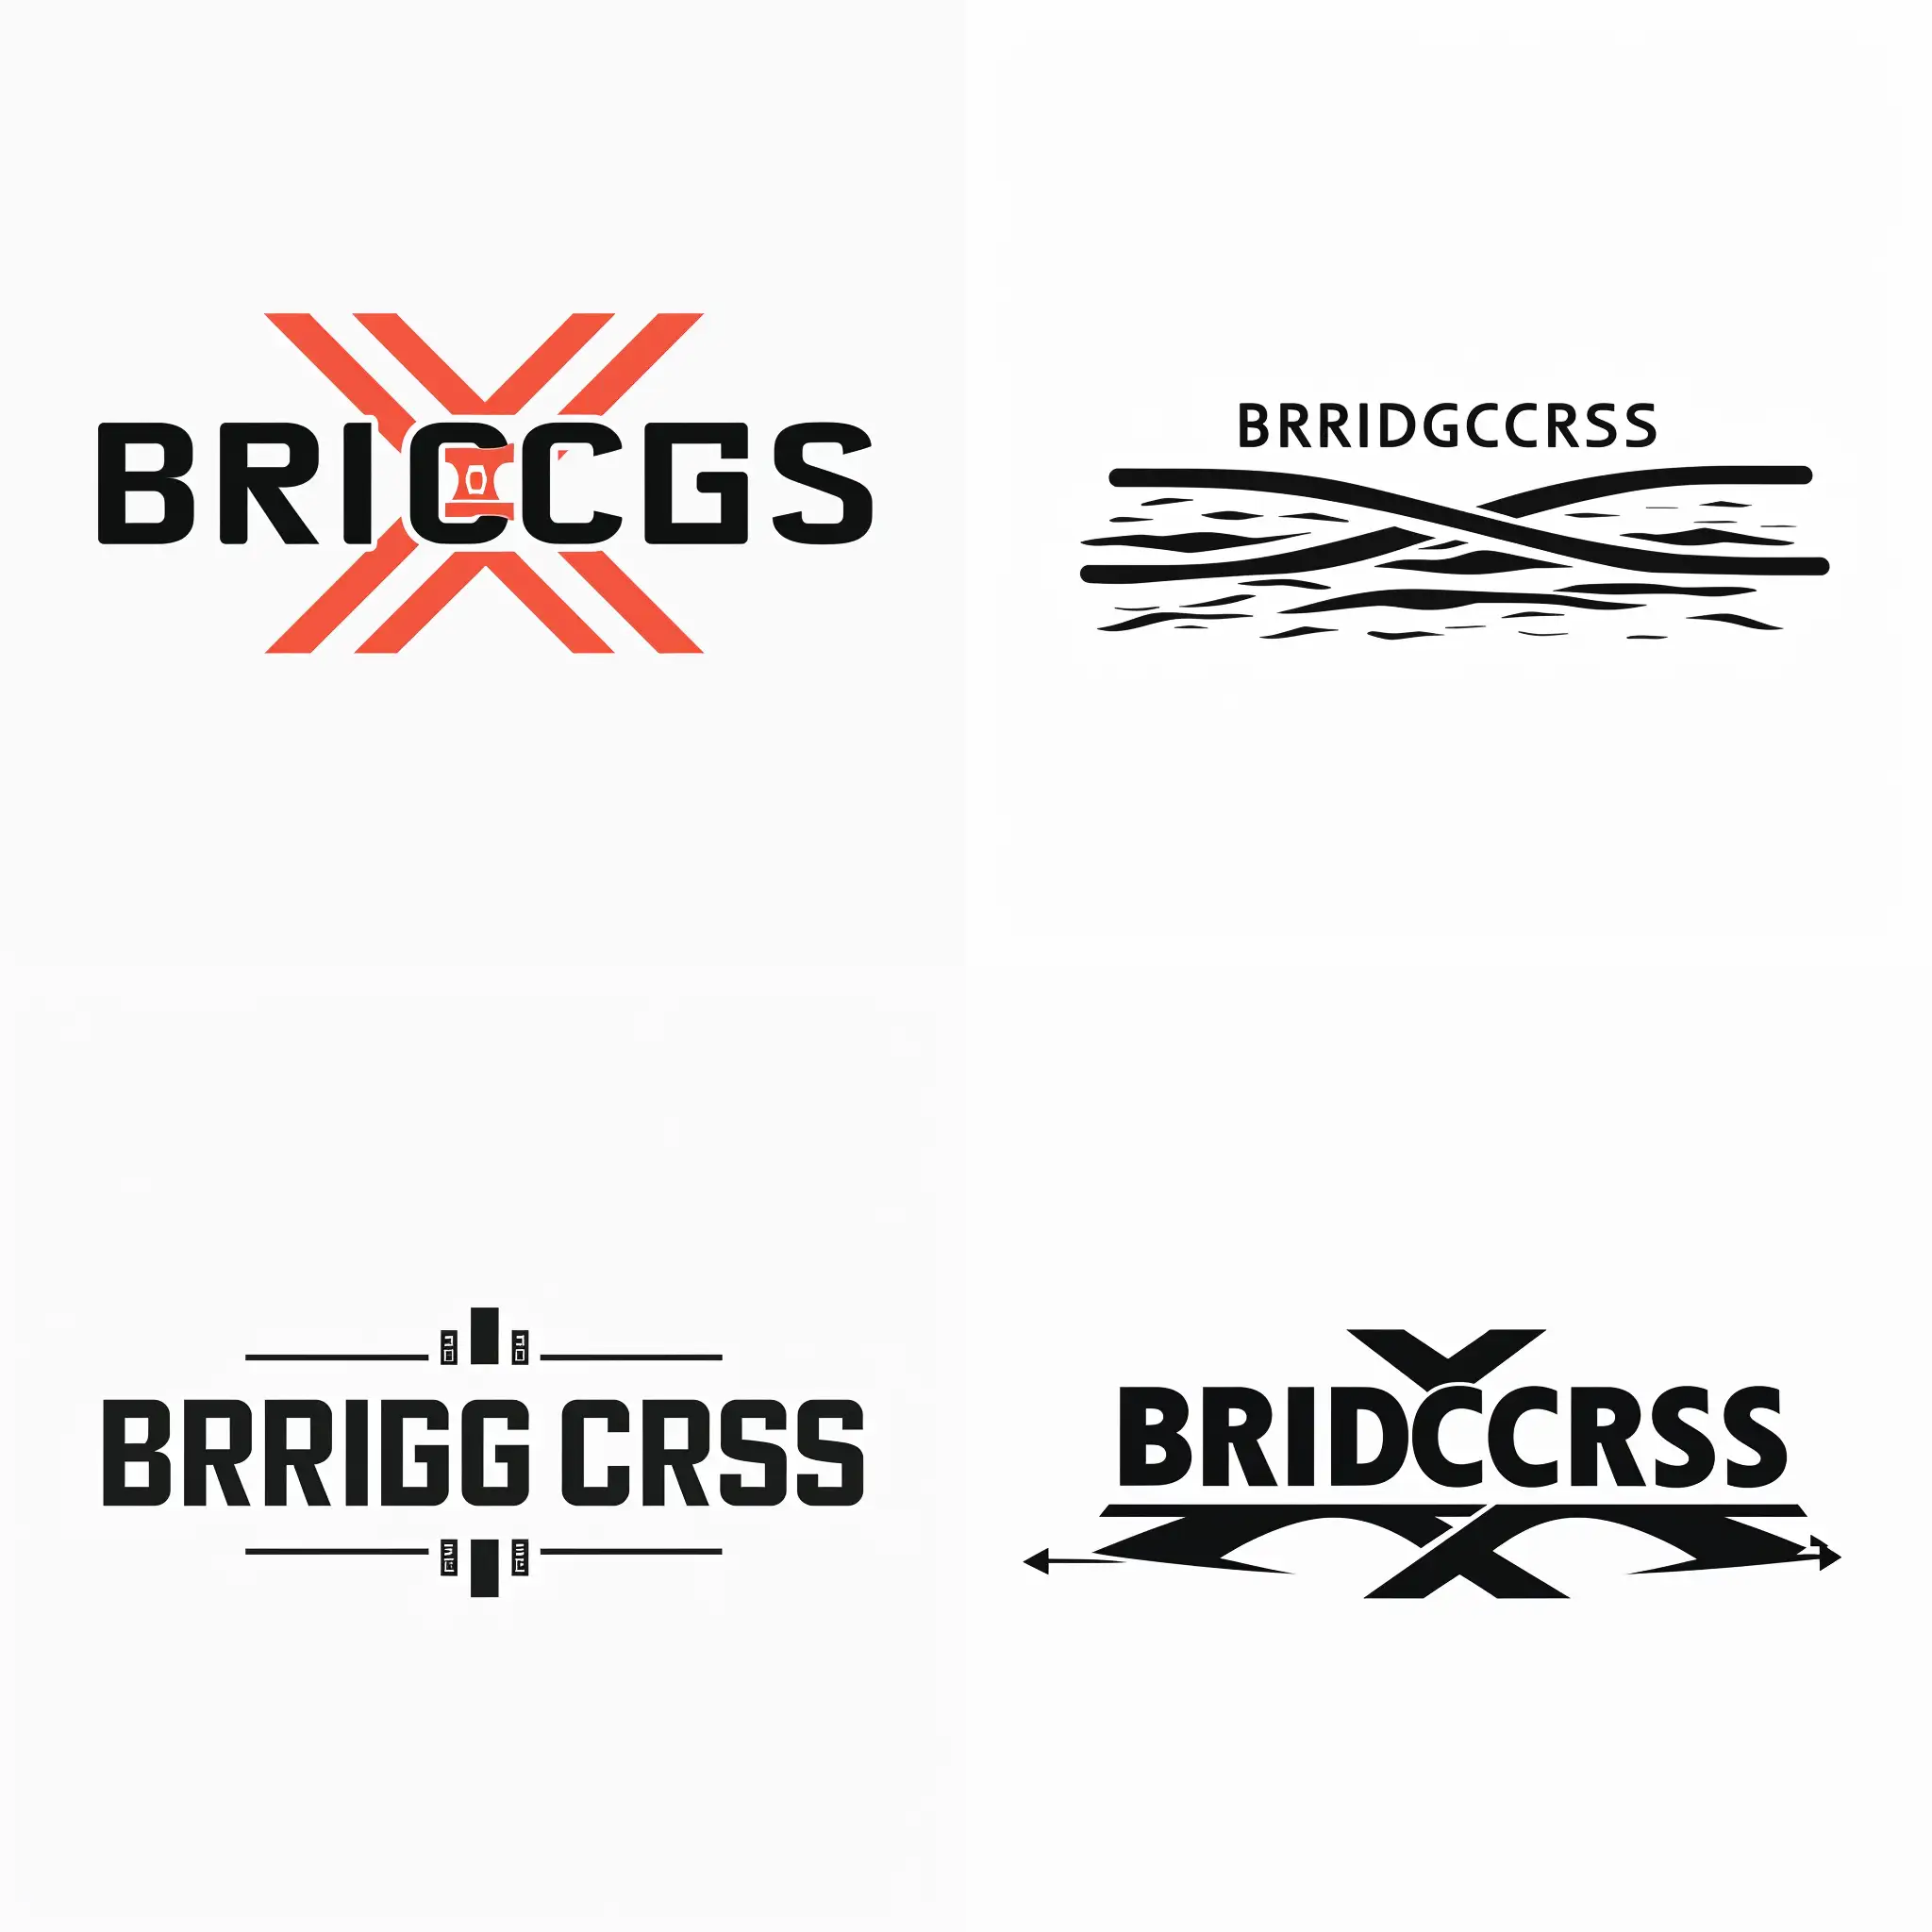 please generaete a company logo with the name BRIDGE CROSS, which means crossing the bridge or bridges get crossed, in simple letters without any background or border,